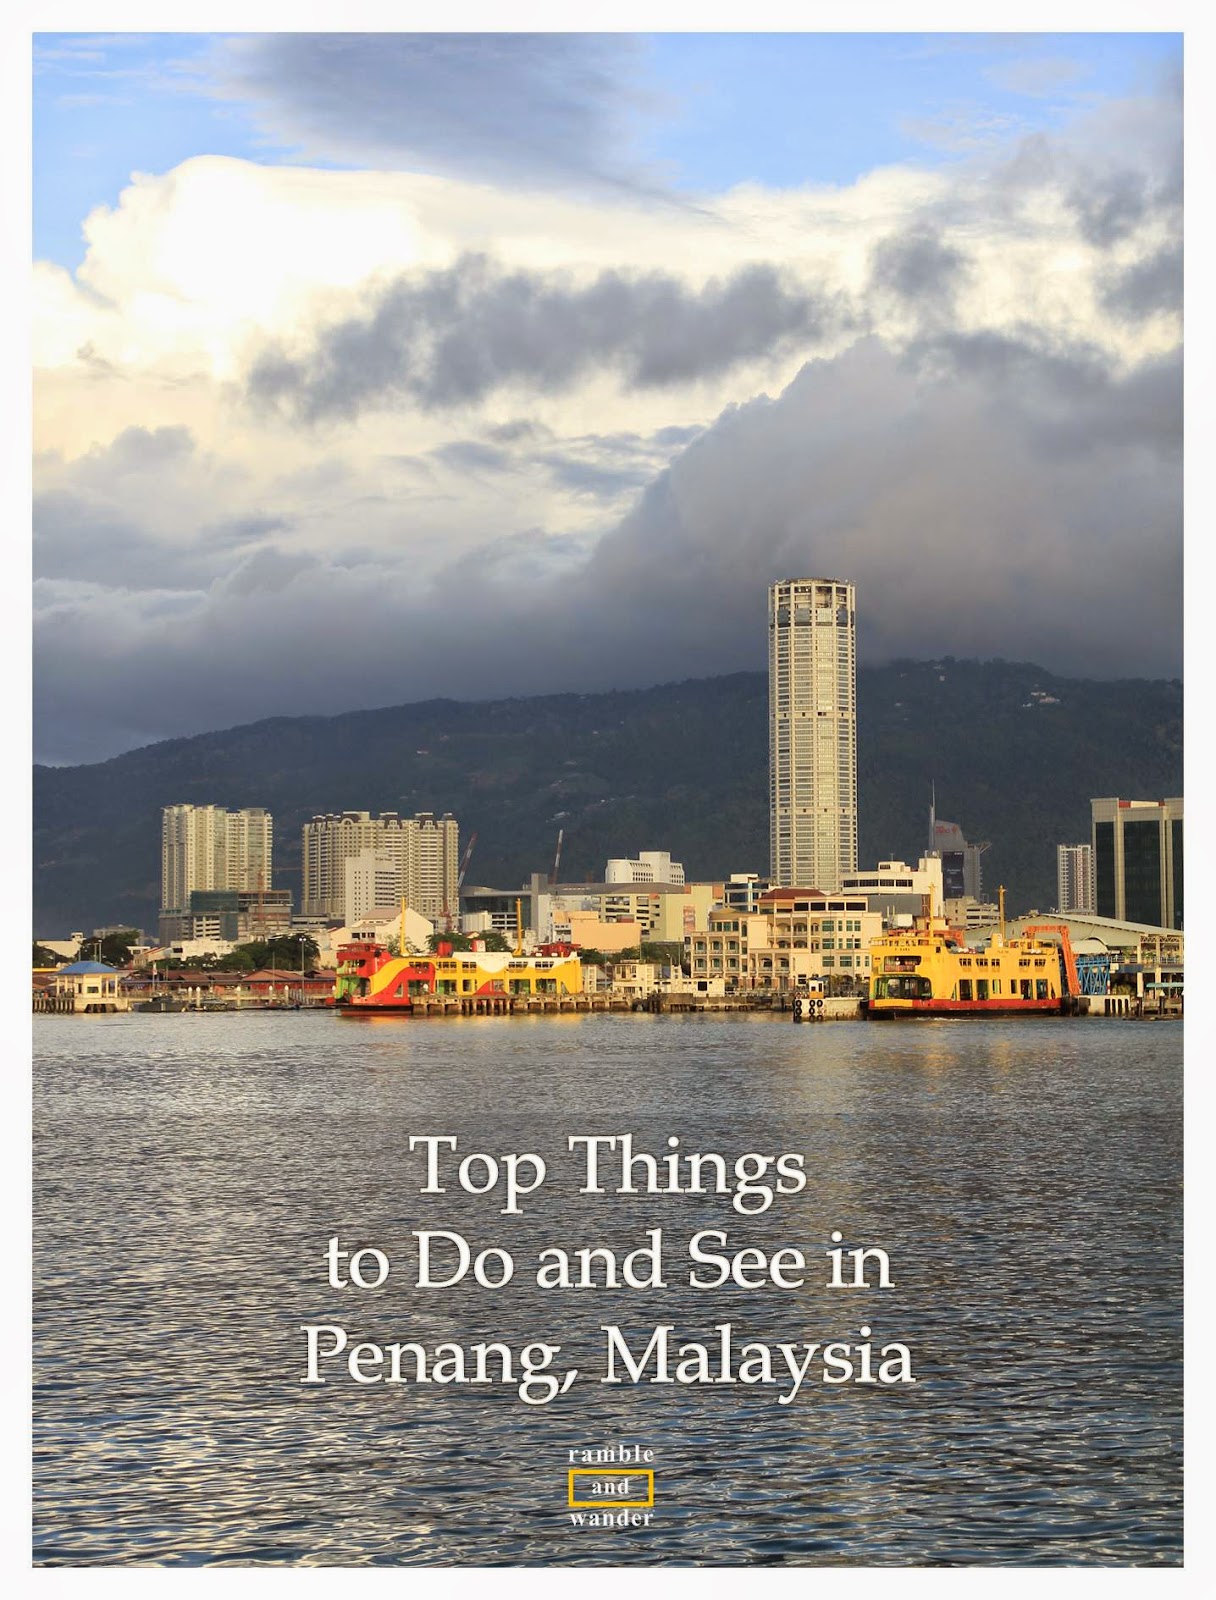 Top Things to Do and See in Penang, Malaysia | www.rambleandwander.com